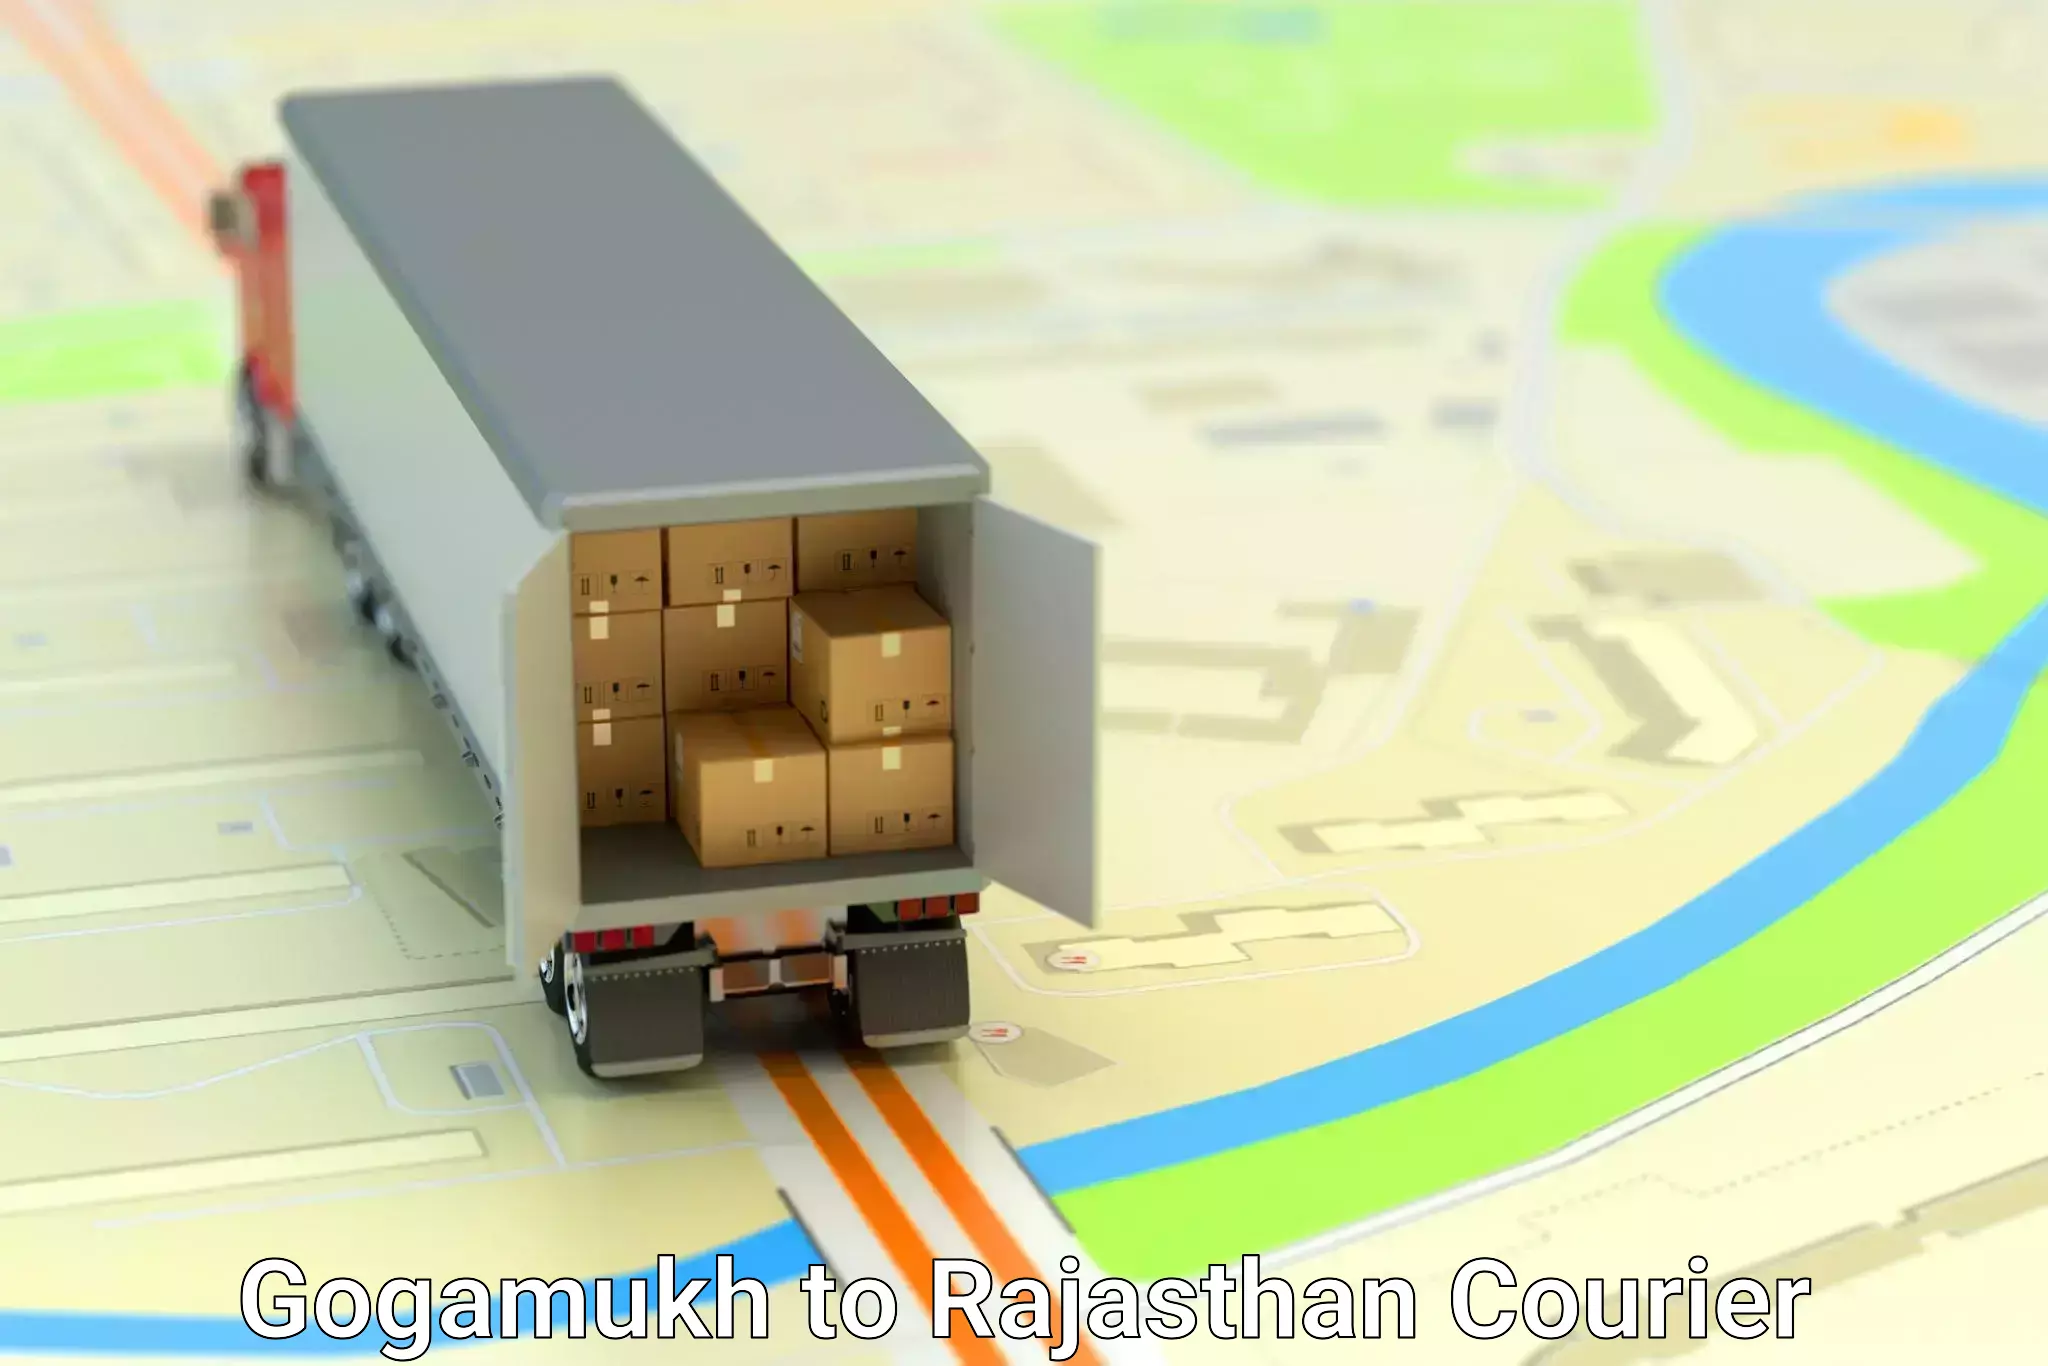 Global freight services Gogamukh to Rajasthan